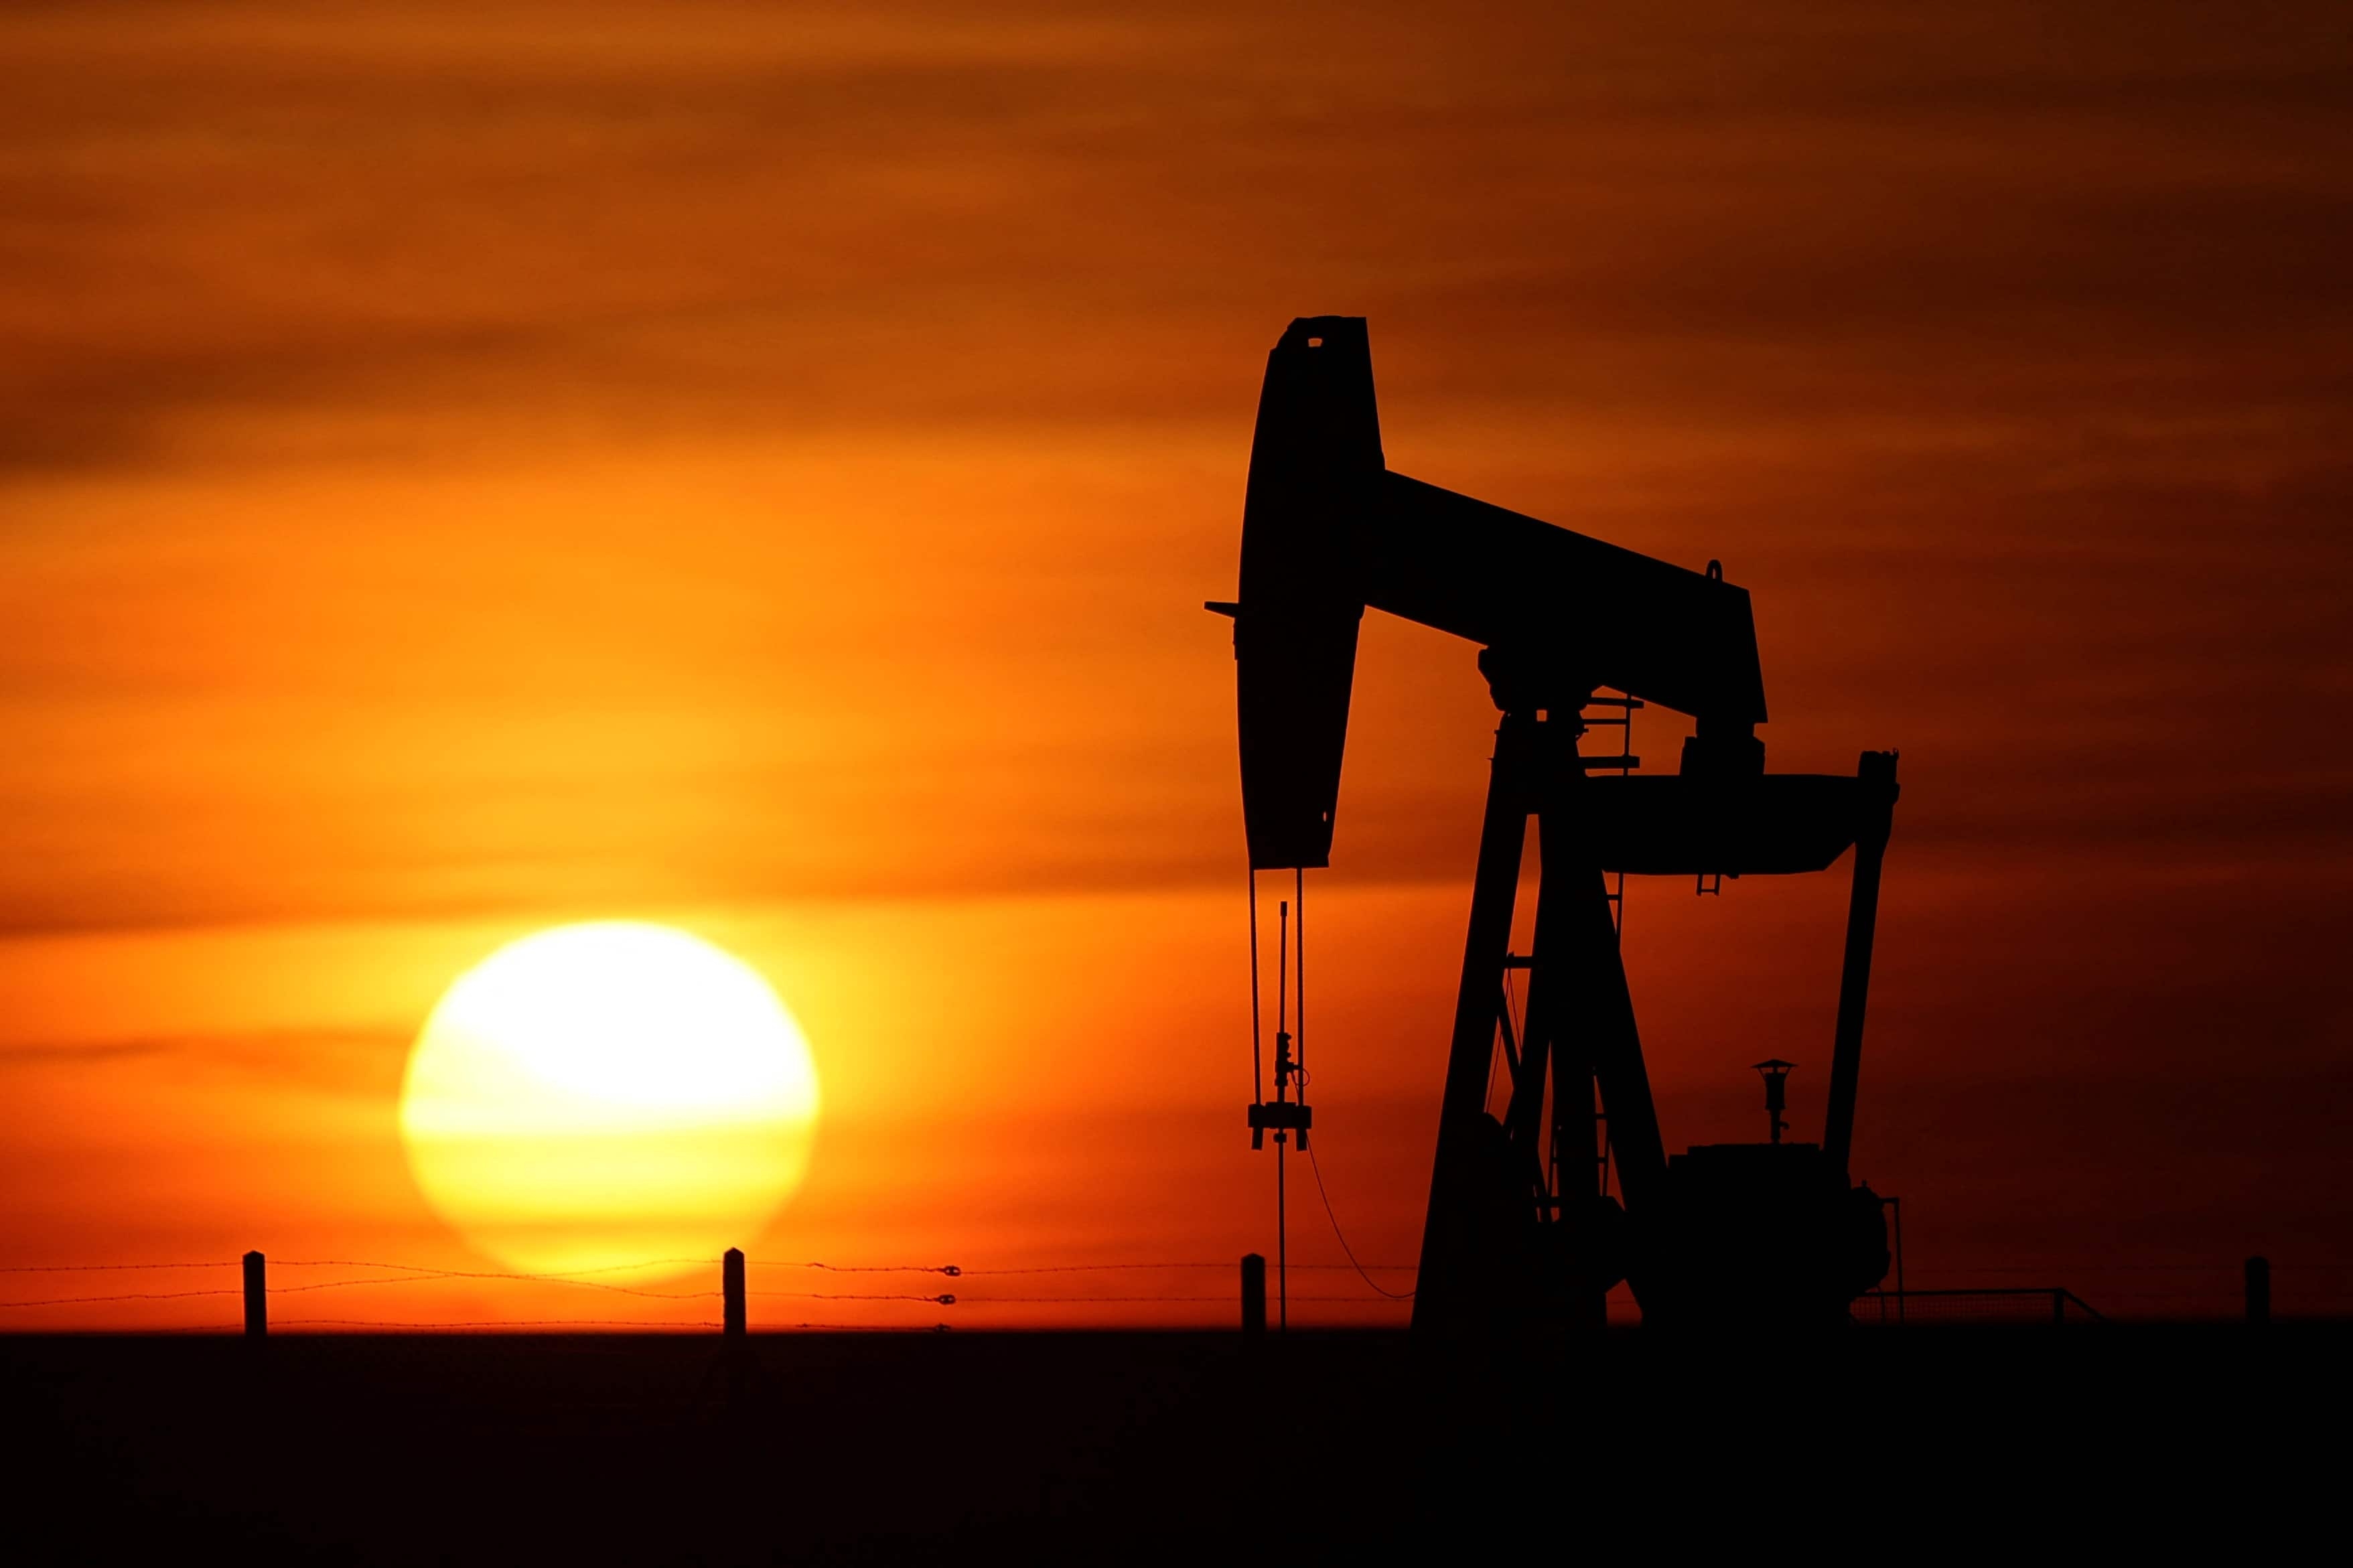 Oil edged lower on Tuesday after it looked unlikely that European Union nations would agree to join the United States in a Russian oil embargo in retaliation for its invasion of Ukraine. Brent crude fell 14 cents, or 0.2%, to settle at $115.48 a barrel. U.S. West Texas Intermediate crude ended 36 cents, or 0.3%, lower at $111.76. On Monday, both contracts had settled up more than 7% on the potential EU ban.